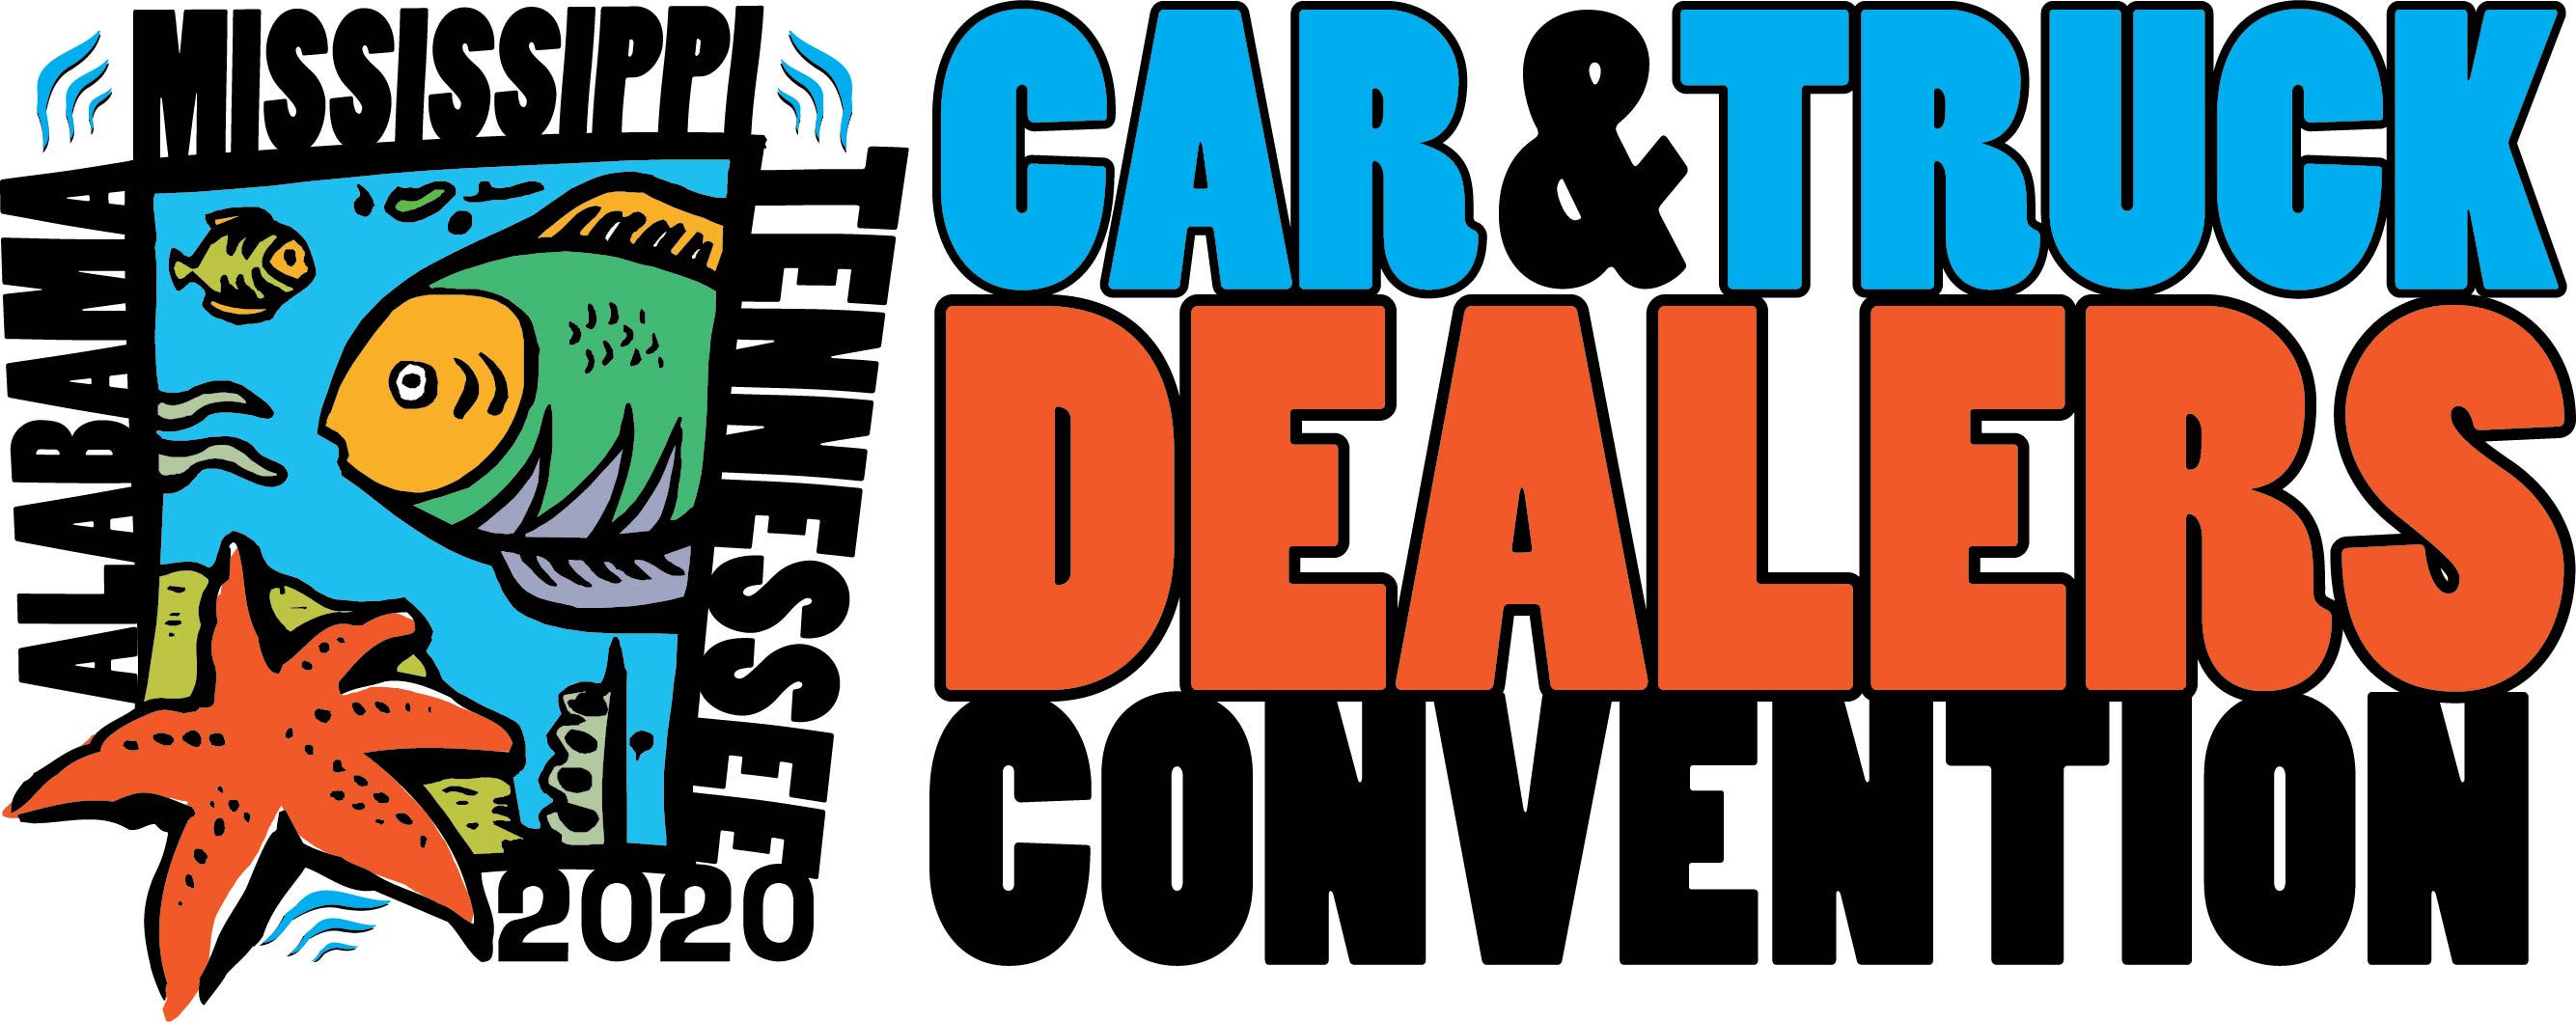 Car & Truck Dealers Convention 2020, June 21st - 24th, 2020